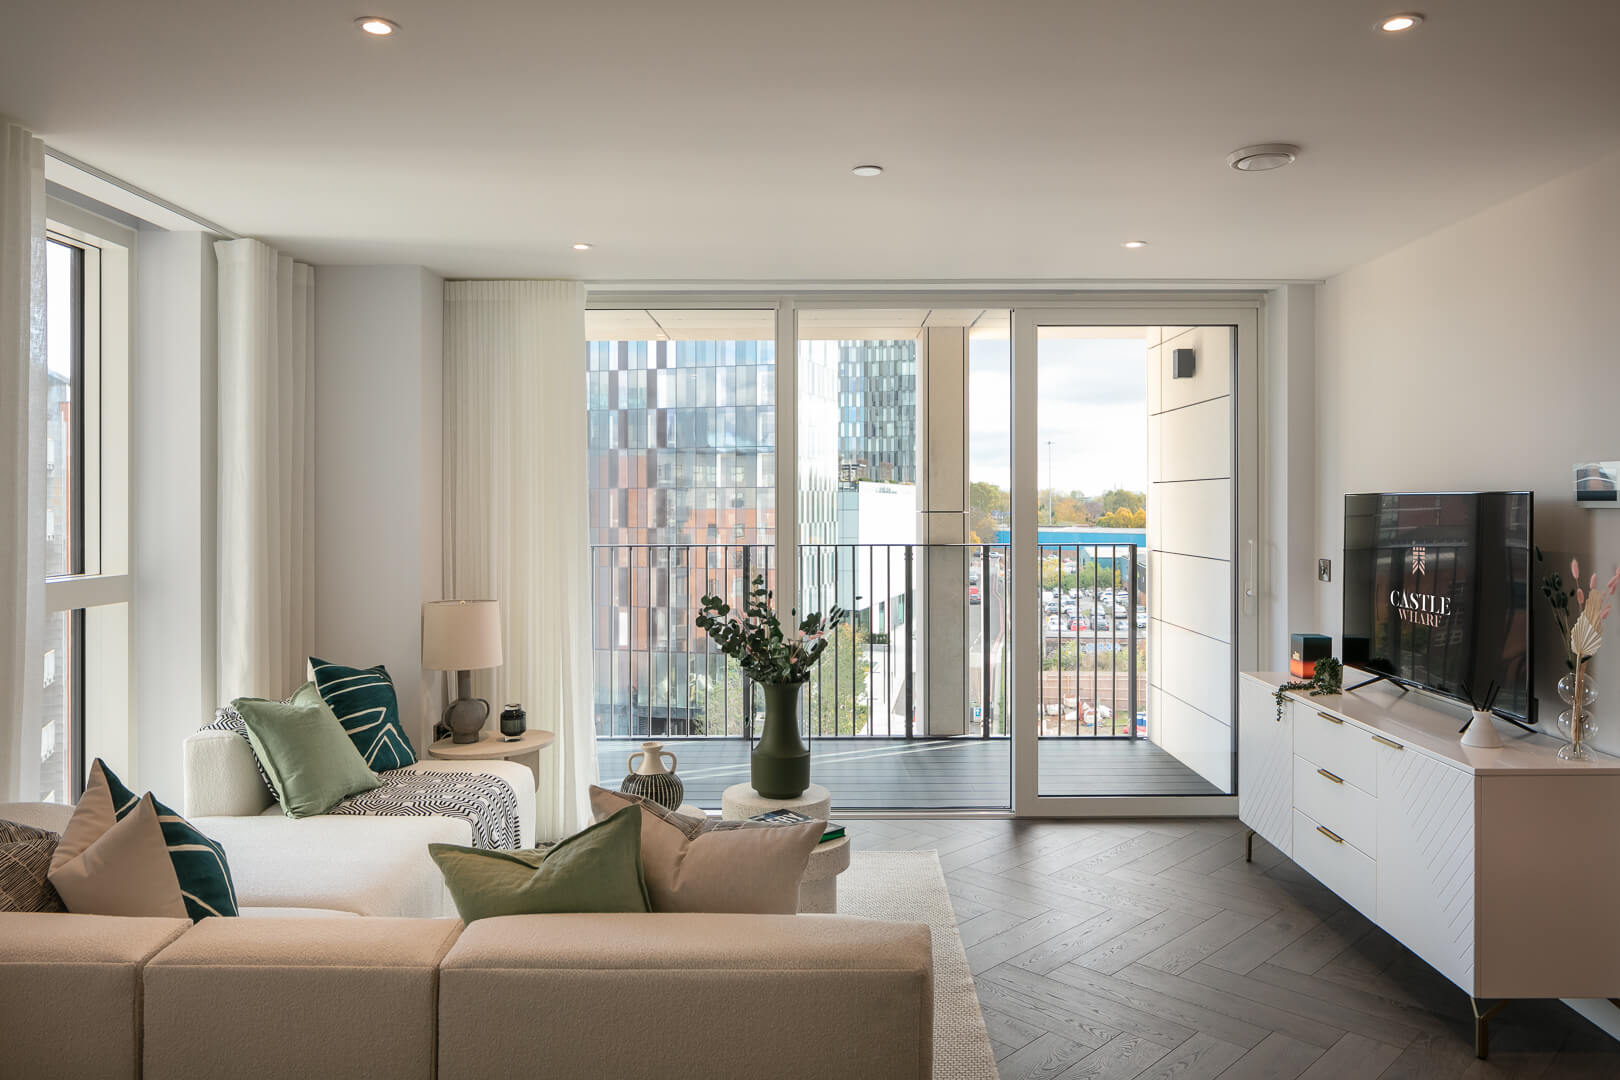 architectural and interior photography at Renaker's Castle Wharf residential development, Manchester